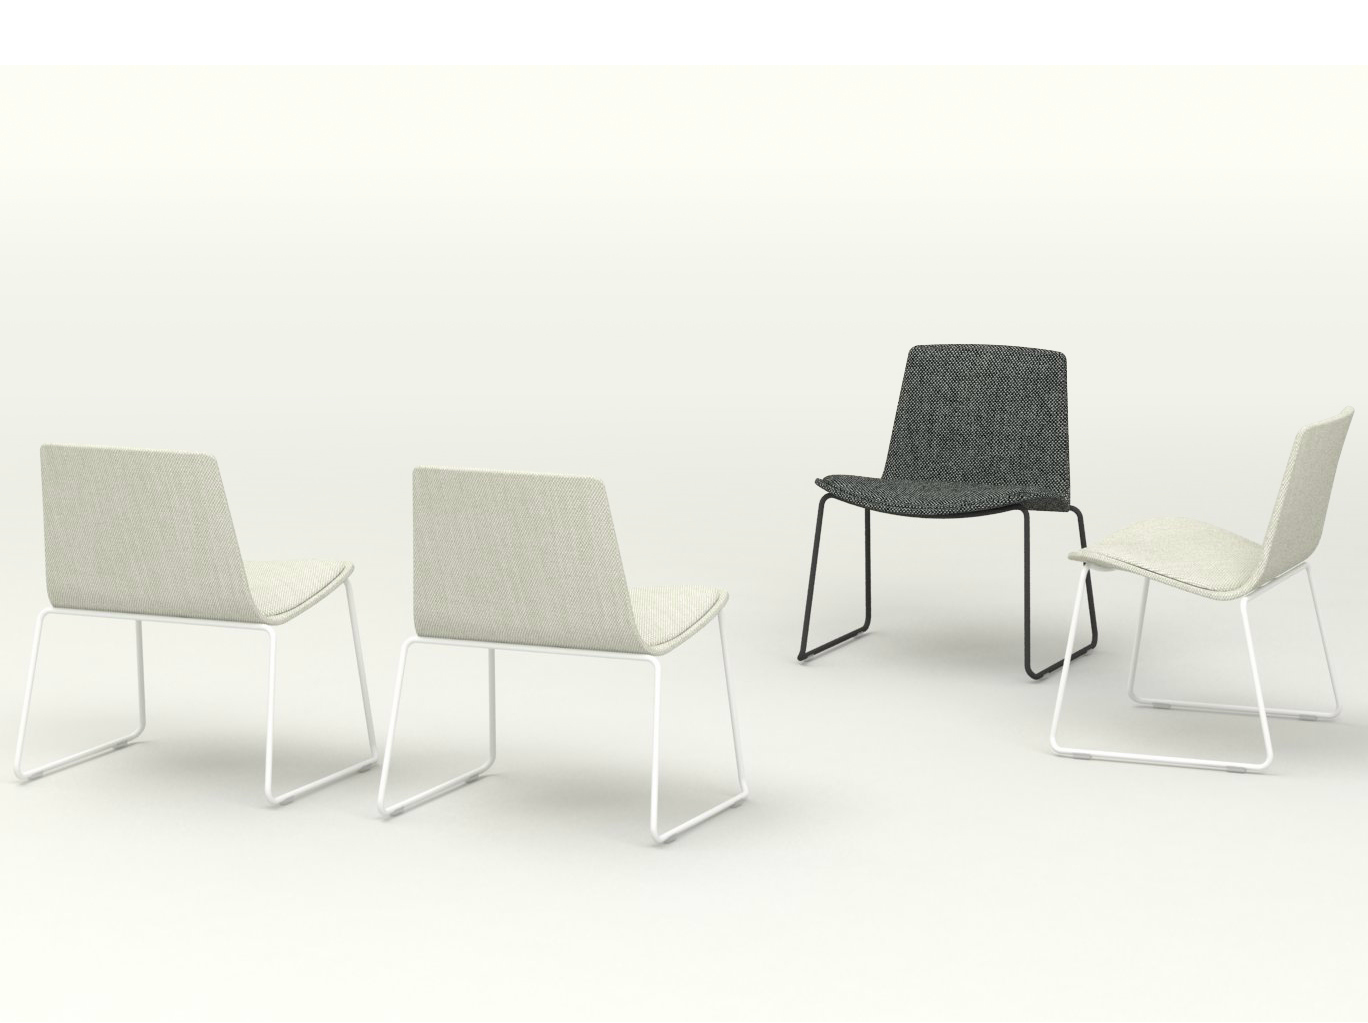 Lottus Lounge Chair by Lievore Altherr Molina for ENEA